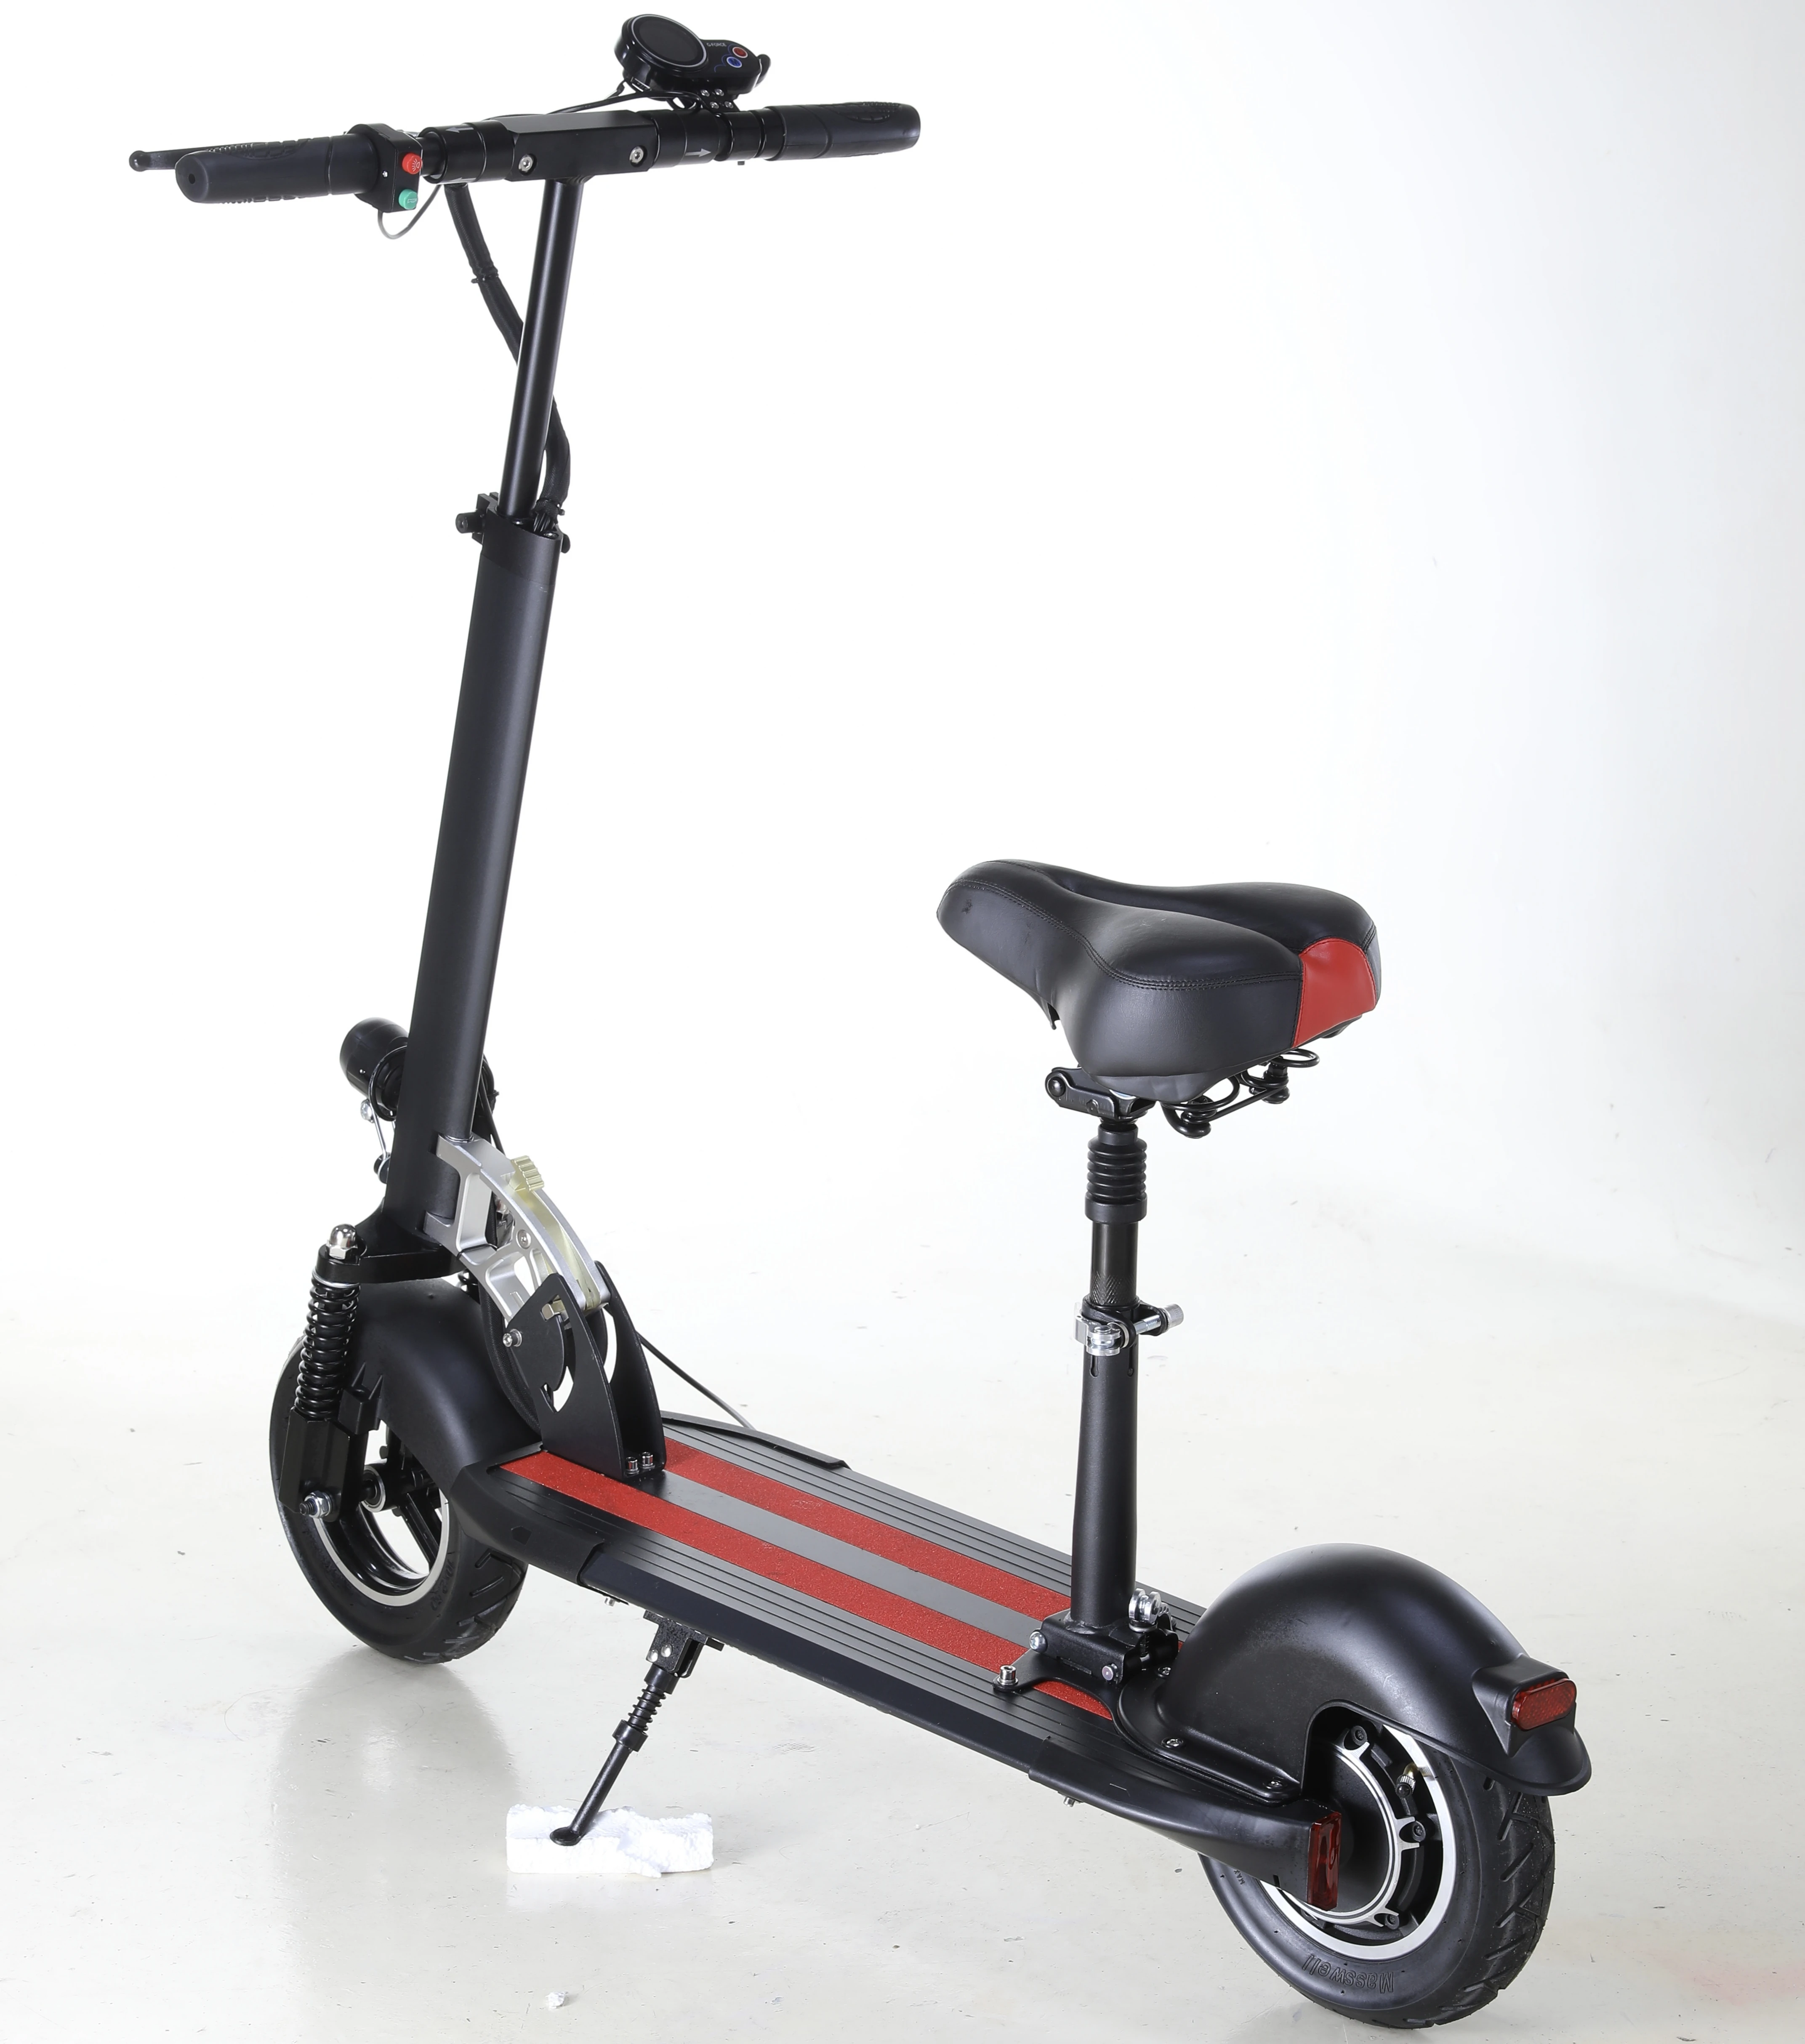 A popular 10 inch lithium battery small foldable electric scooter for both men and women to use